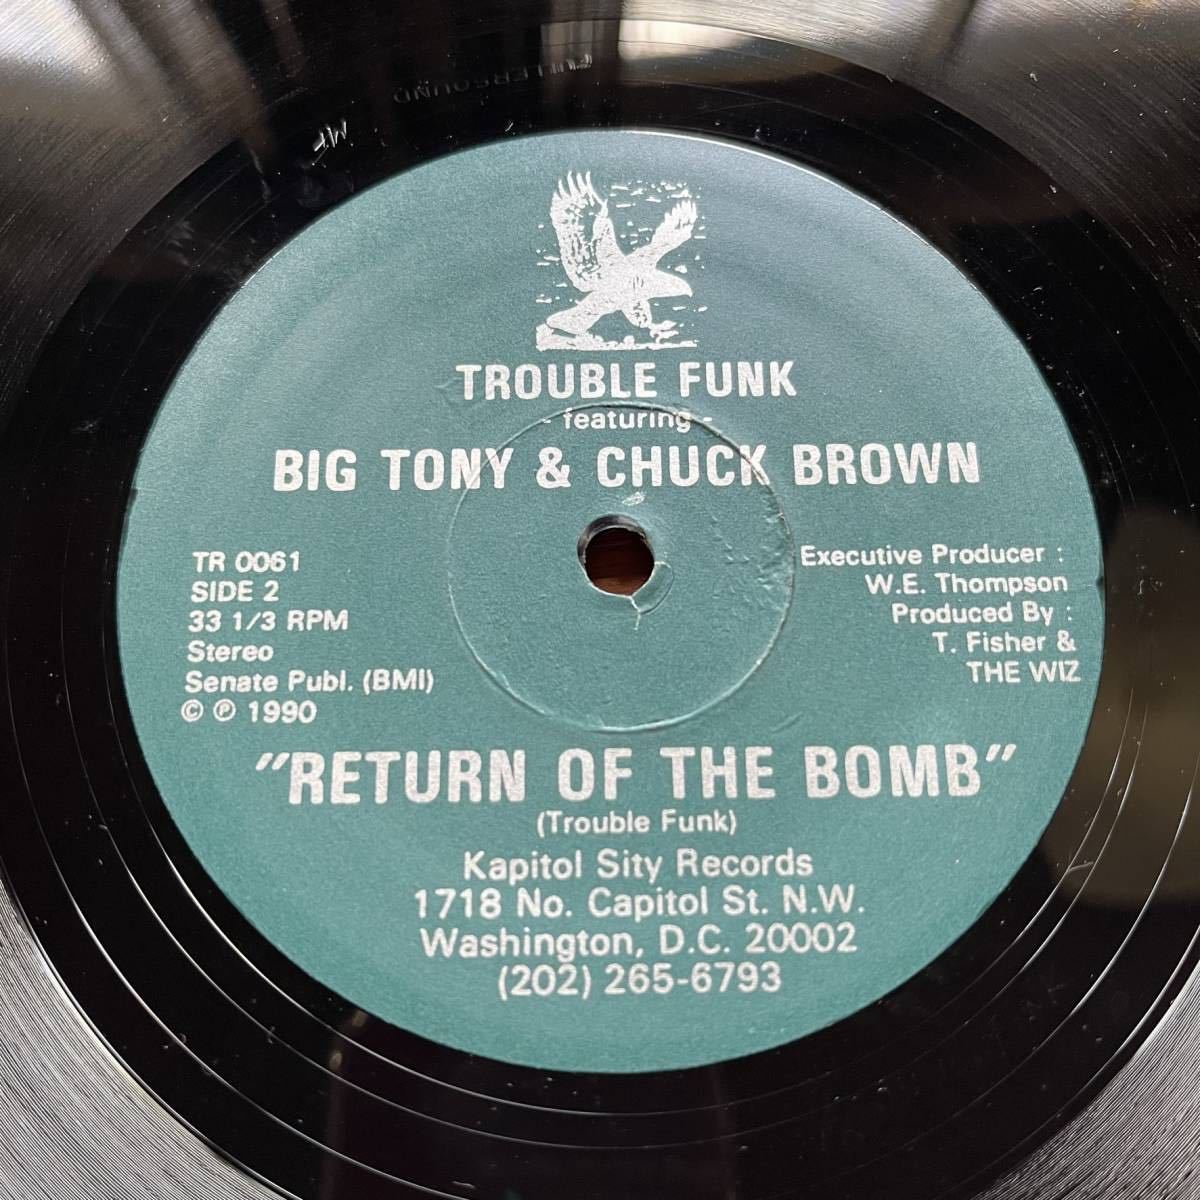 【12‘ GO-GO】TROUBLE FUNK ft. BIG TONY & CHUCK BROWN『GUESS WHO'S BACK, RETURN OF THE BOMB』トラブル・ファンク/チャック・ブラウン_画像2